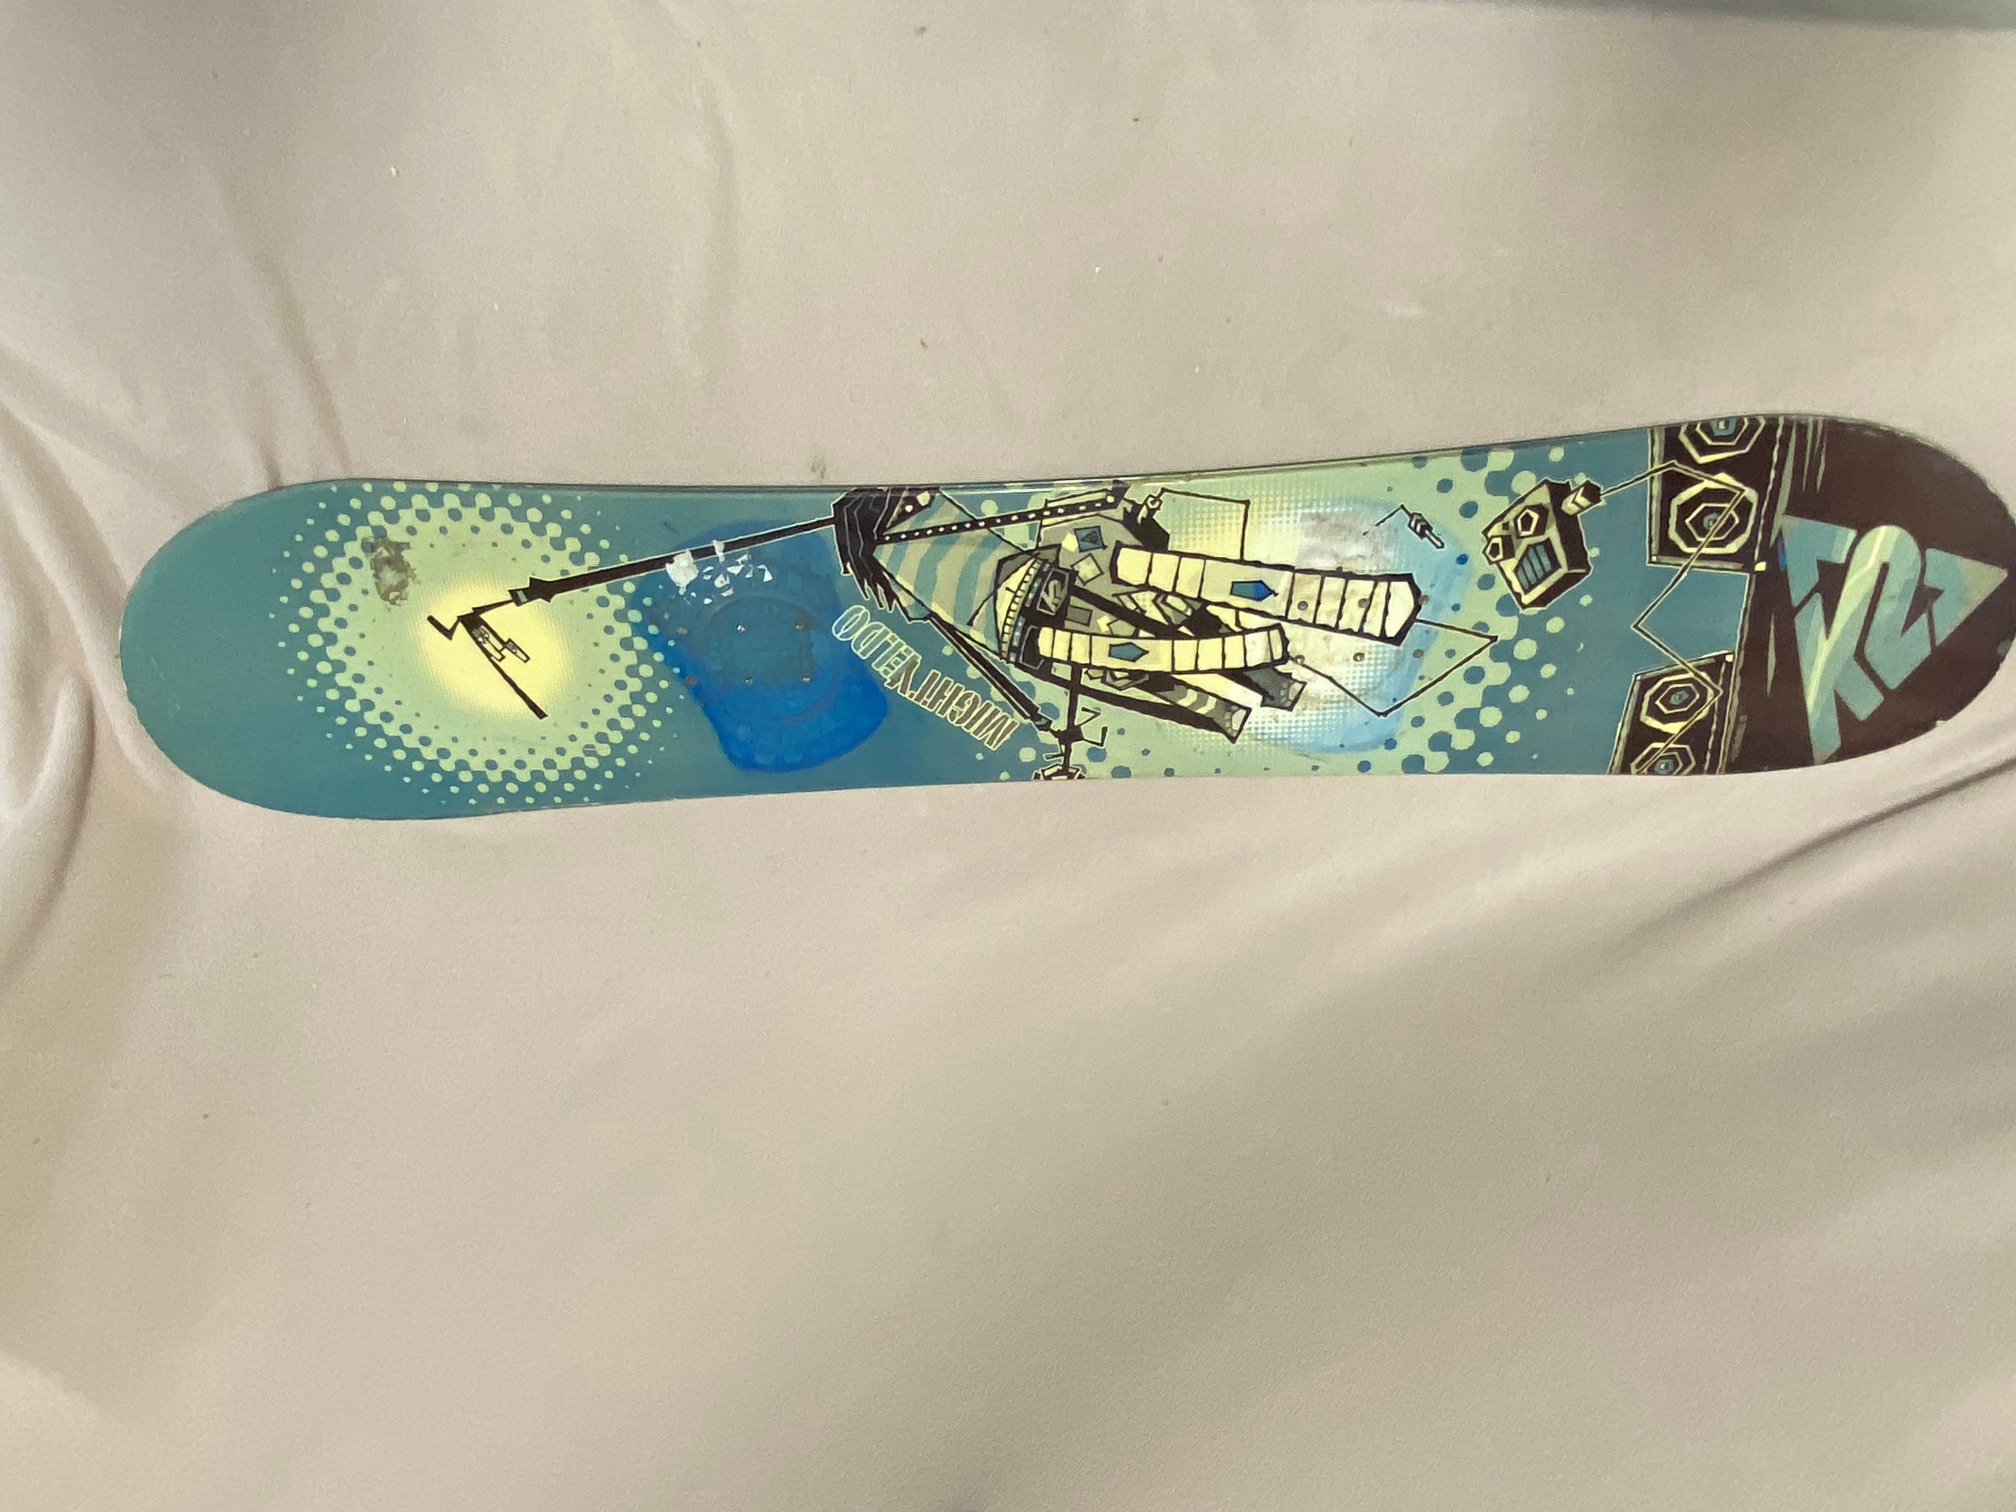 New Unisex K2 Mighty Eldo Snowboard All Mountain Without Bindings